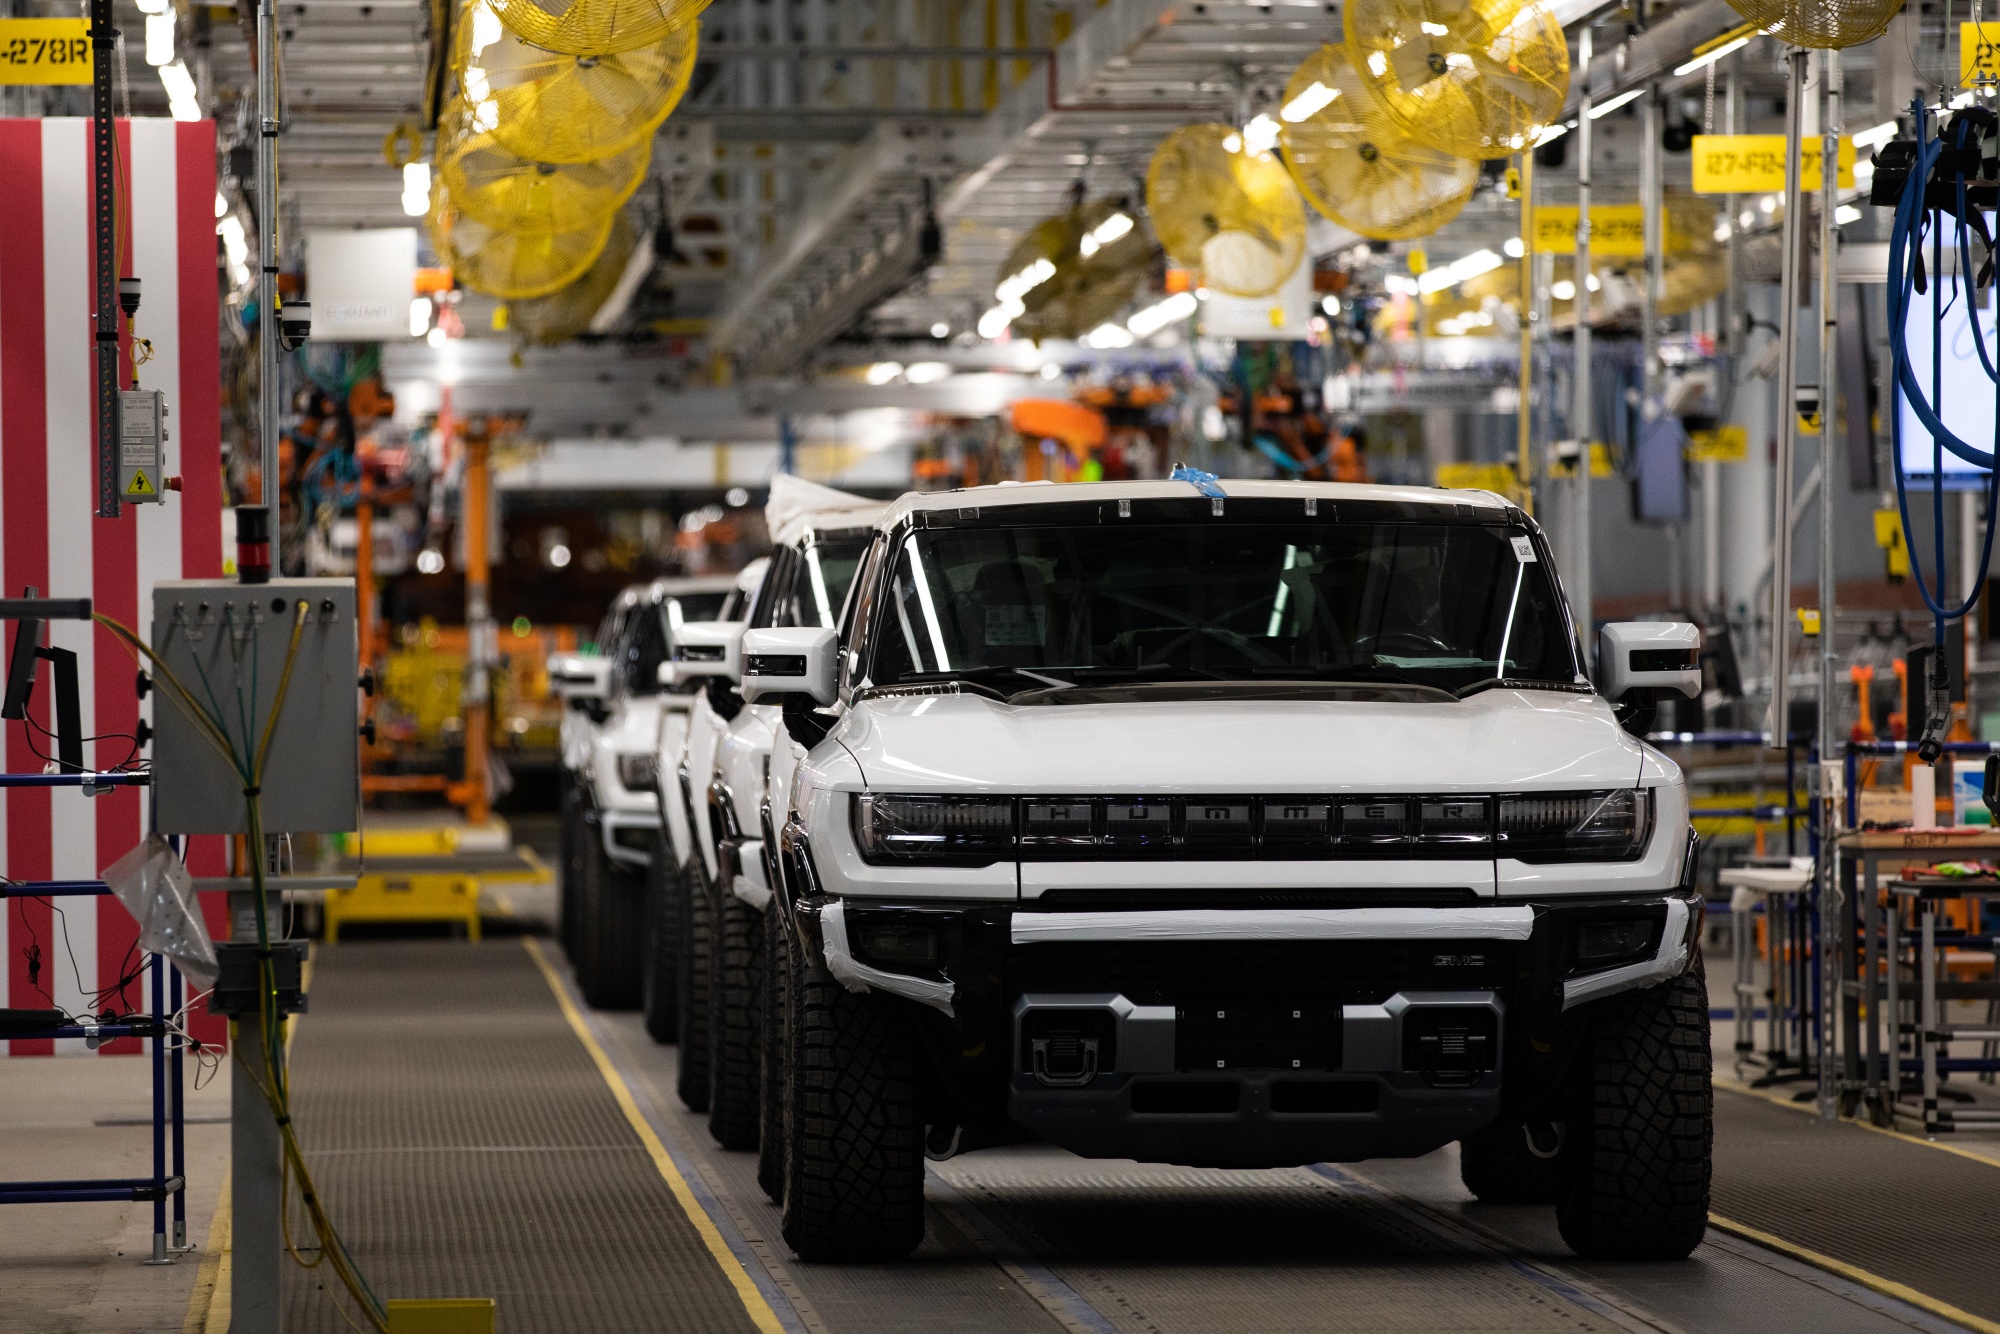 GMC Hummer electric vehicles on the production line at General Motors' Factory ZERO all-electric vehicle assembly plant in Detroit.